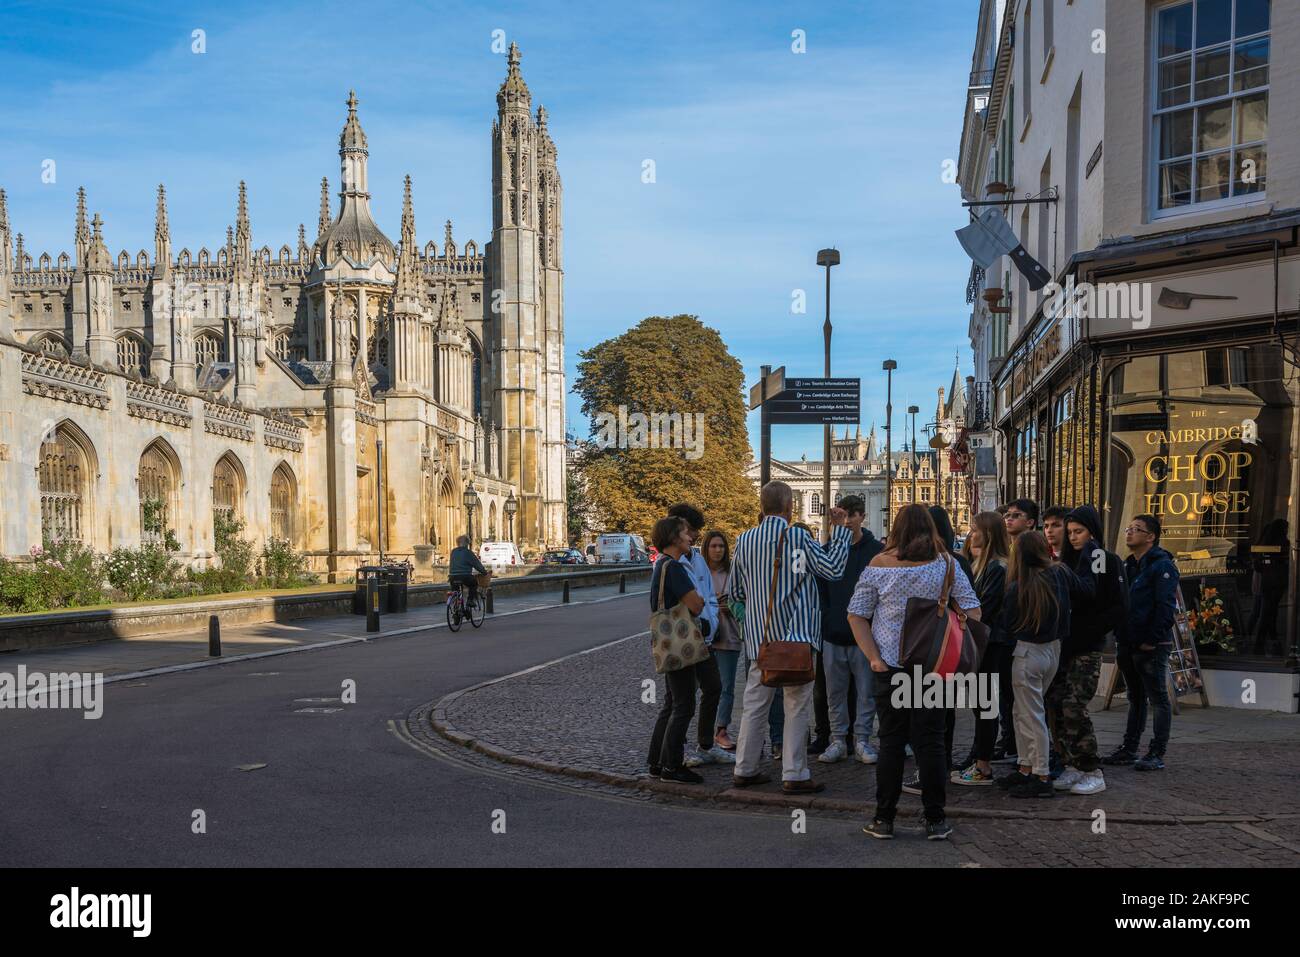 Guide city tour, view of a group of young people in King's Parade, Cambridge, listening to their guide during a tour of the university town, UK Stock Photo